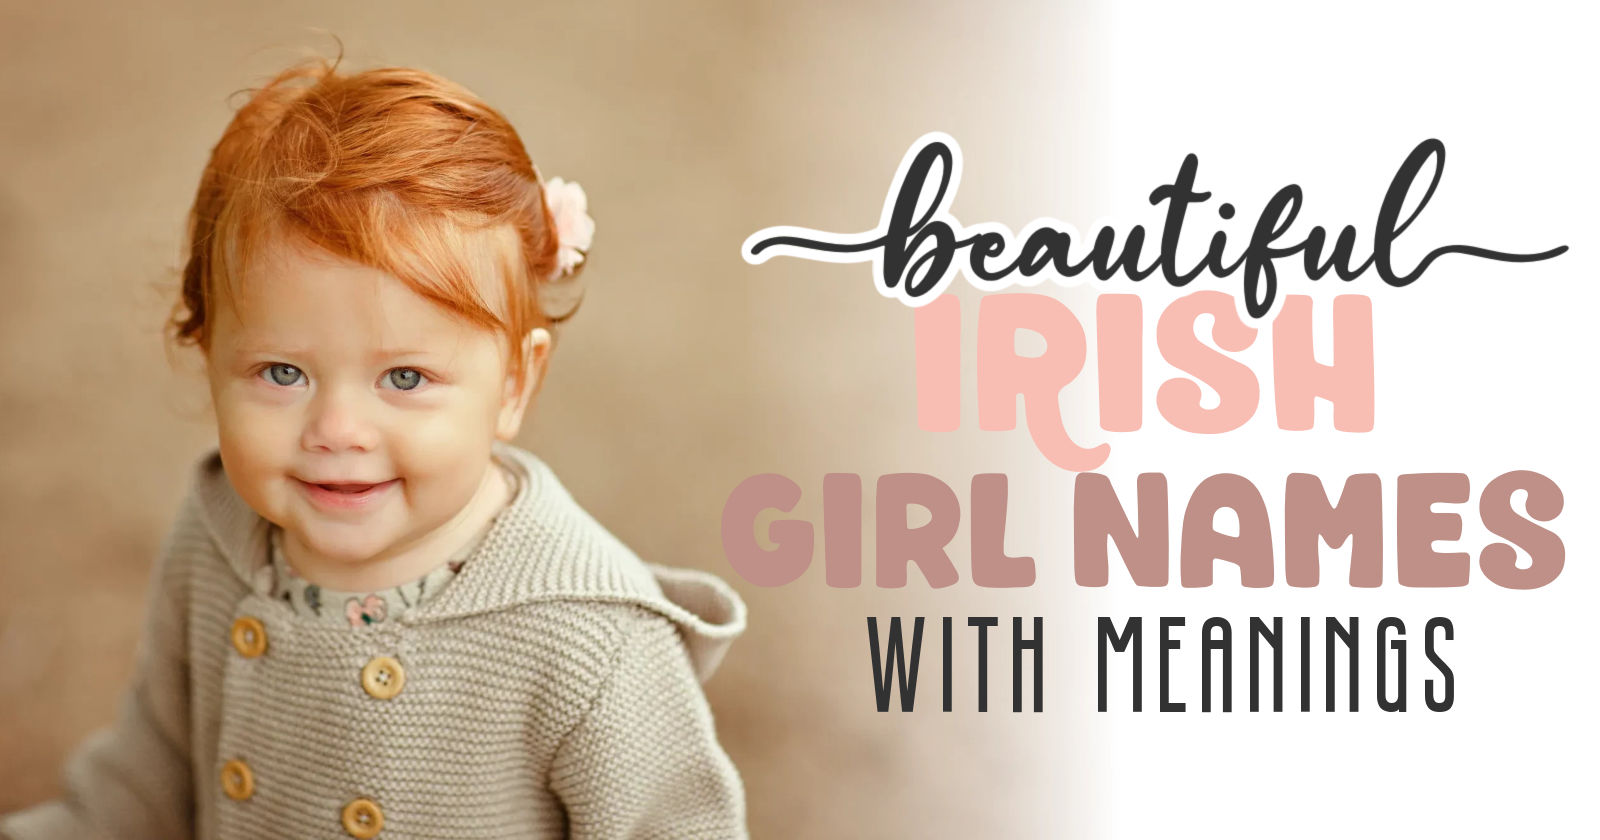 cute red haired Irish baby smiling and title beautiful Irish girl names with meanings